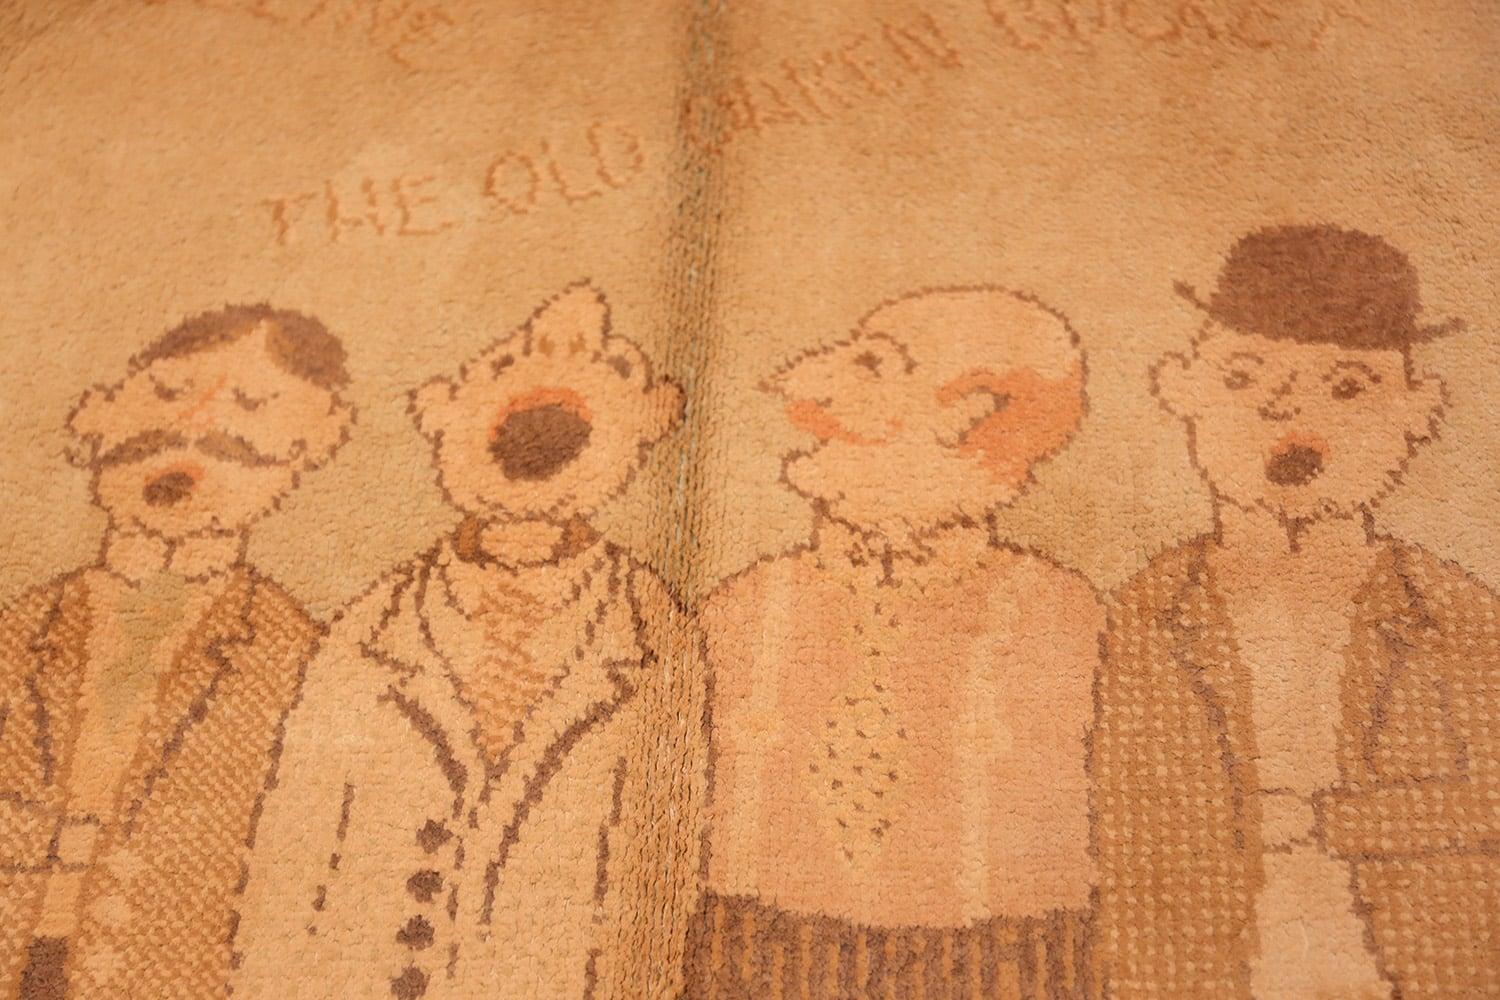 Folk Art hooked rug with barbershop quartet motif, country of origin: United States, date: circa mid-20th century. Size: 3 ft 8 in x 2 ft 10 in (1.12 m x 0.86 m).

